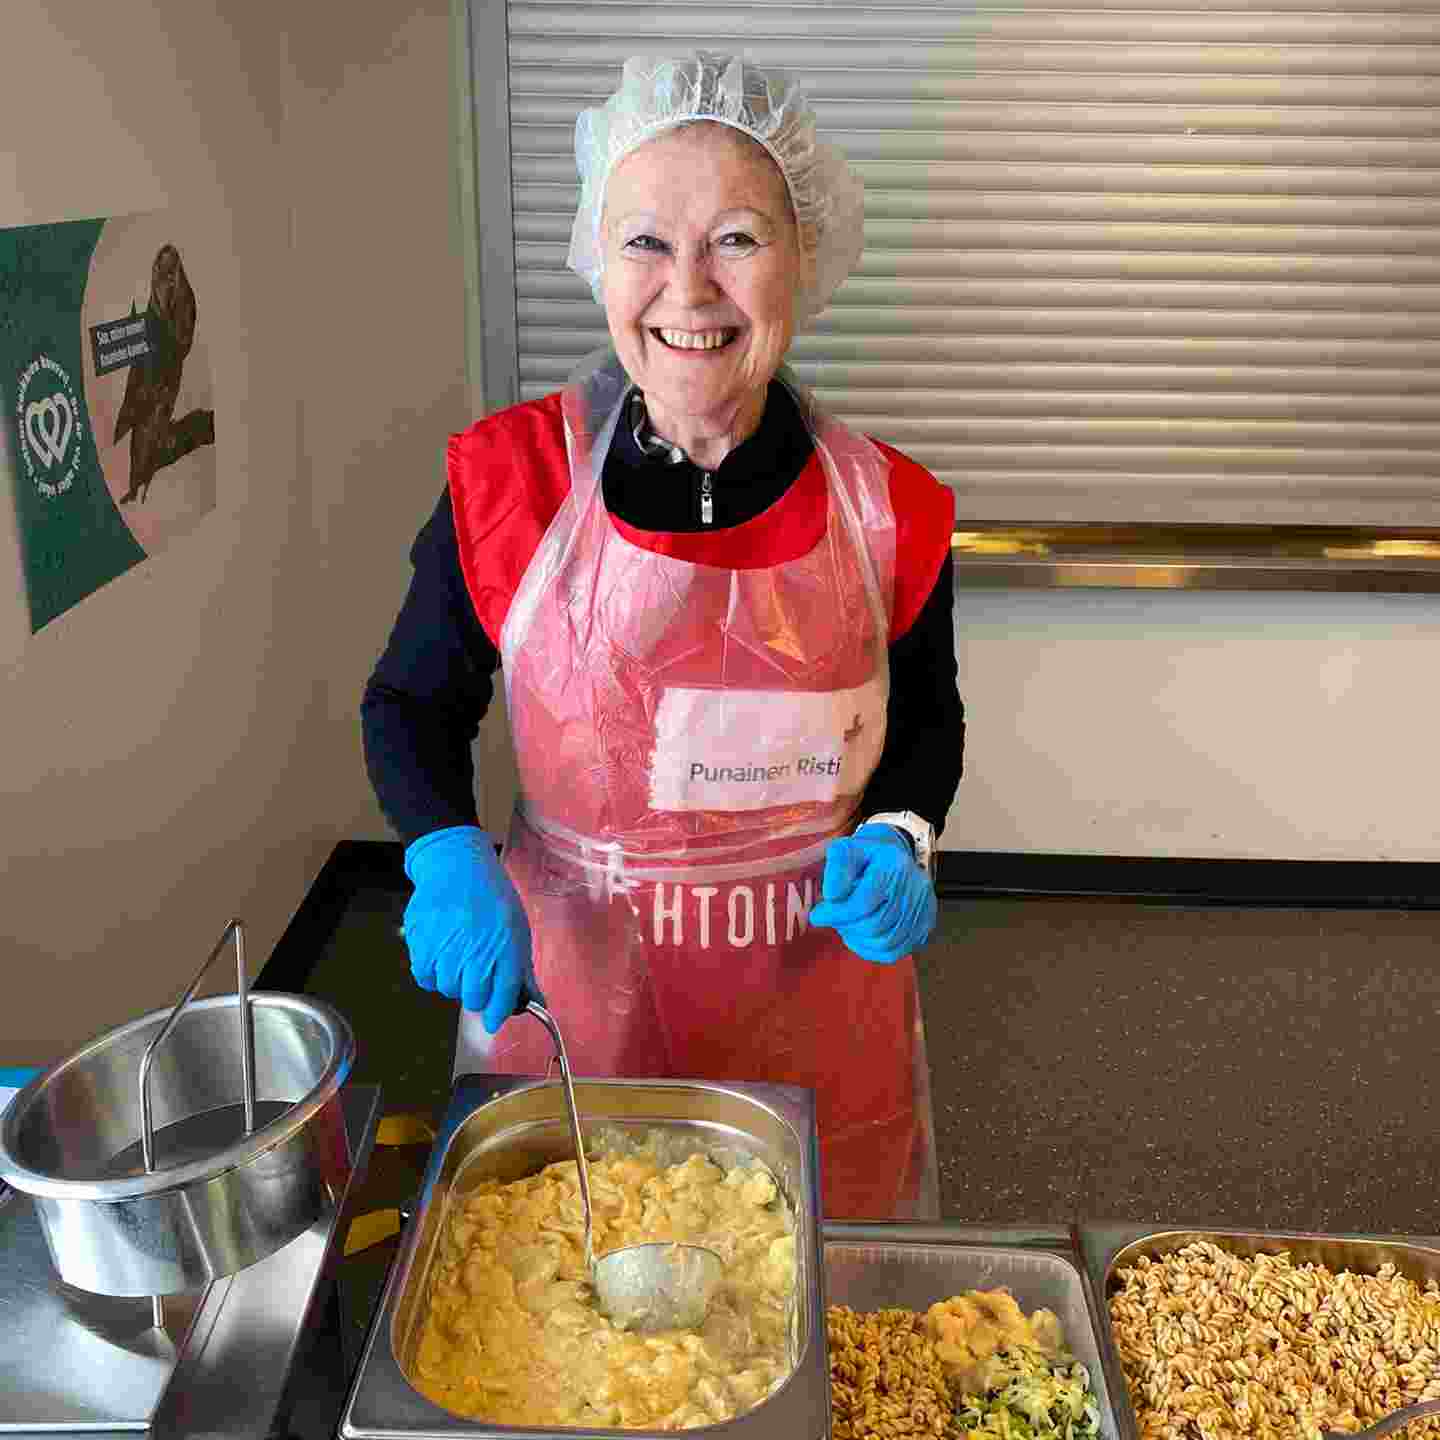 A smiling volunteer with food dishes in front of her.